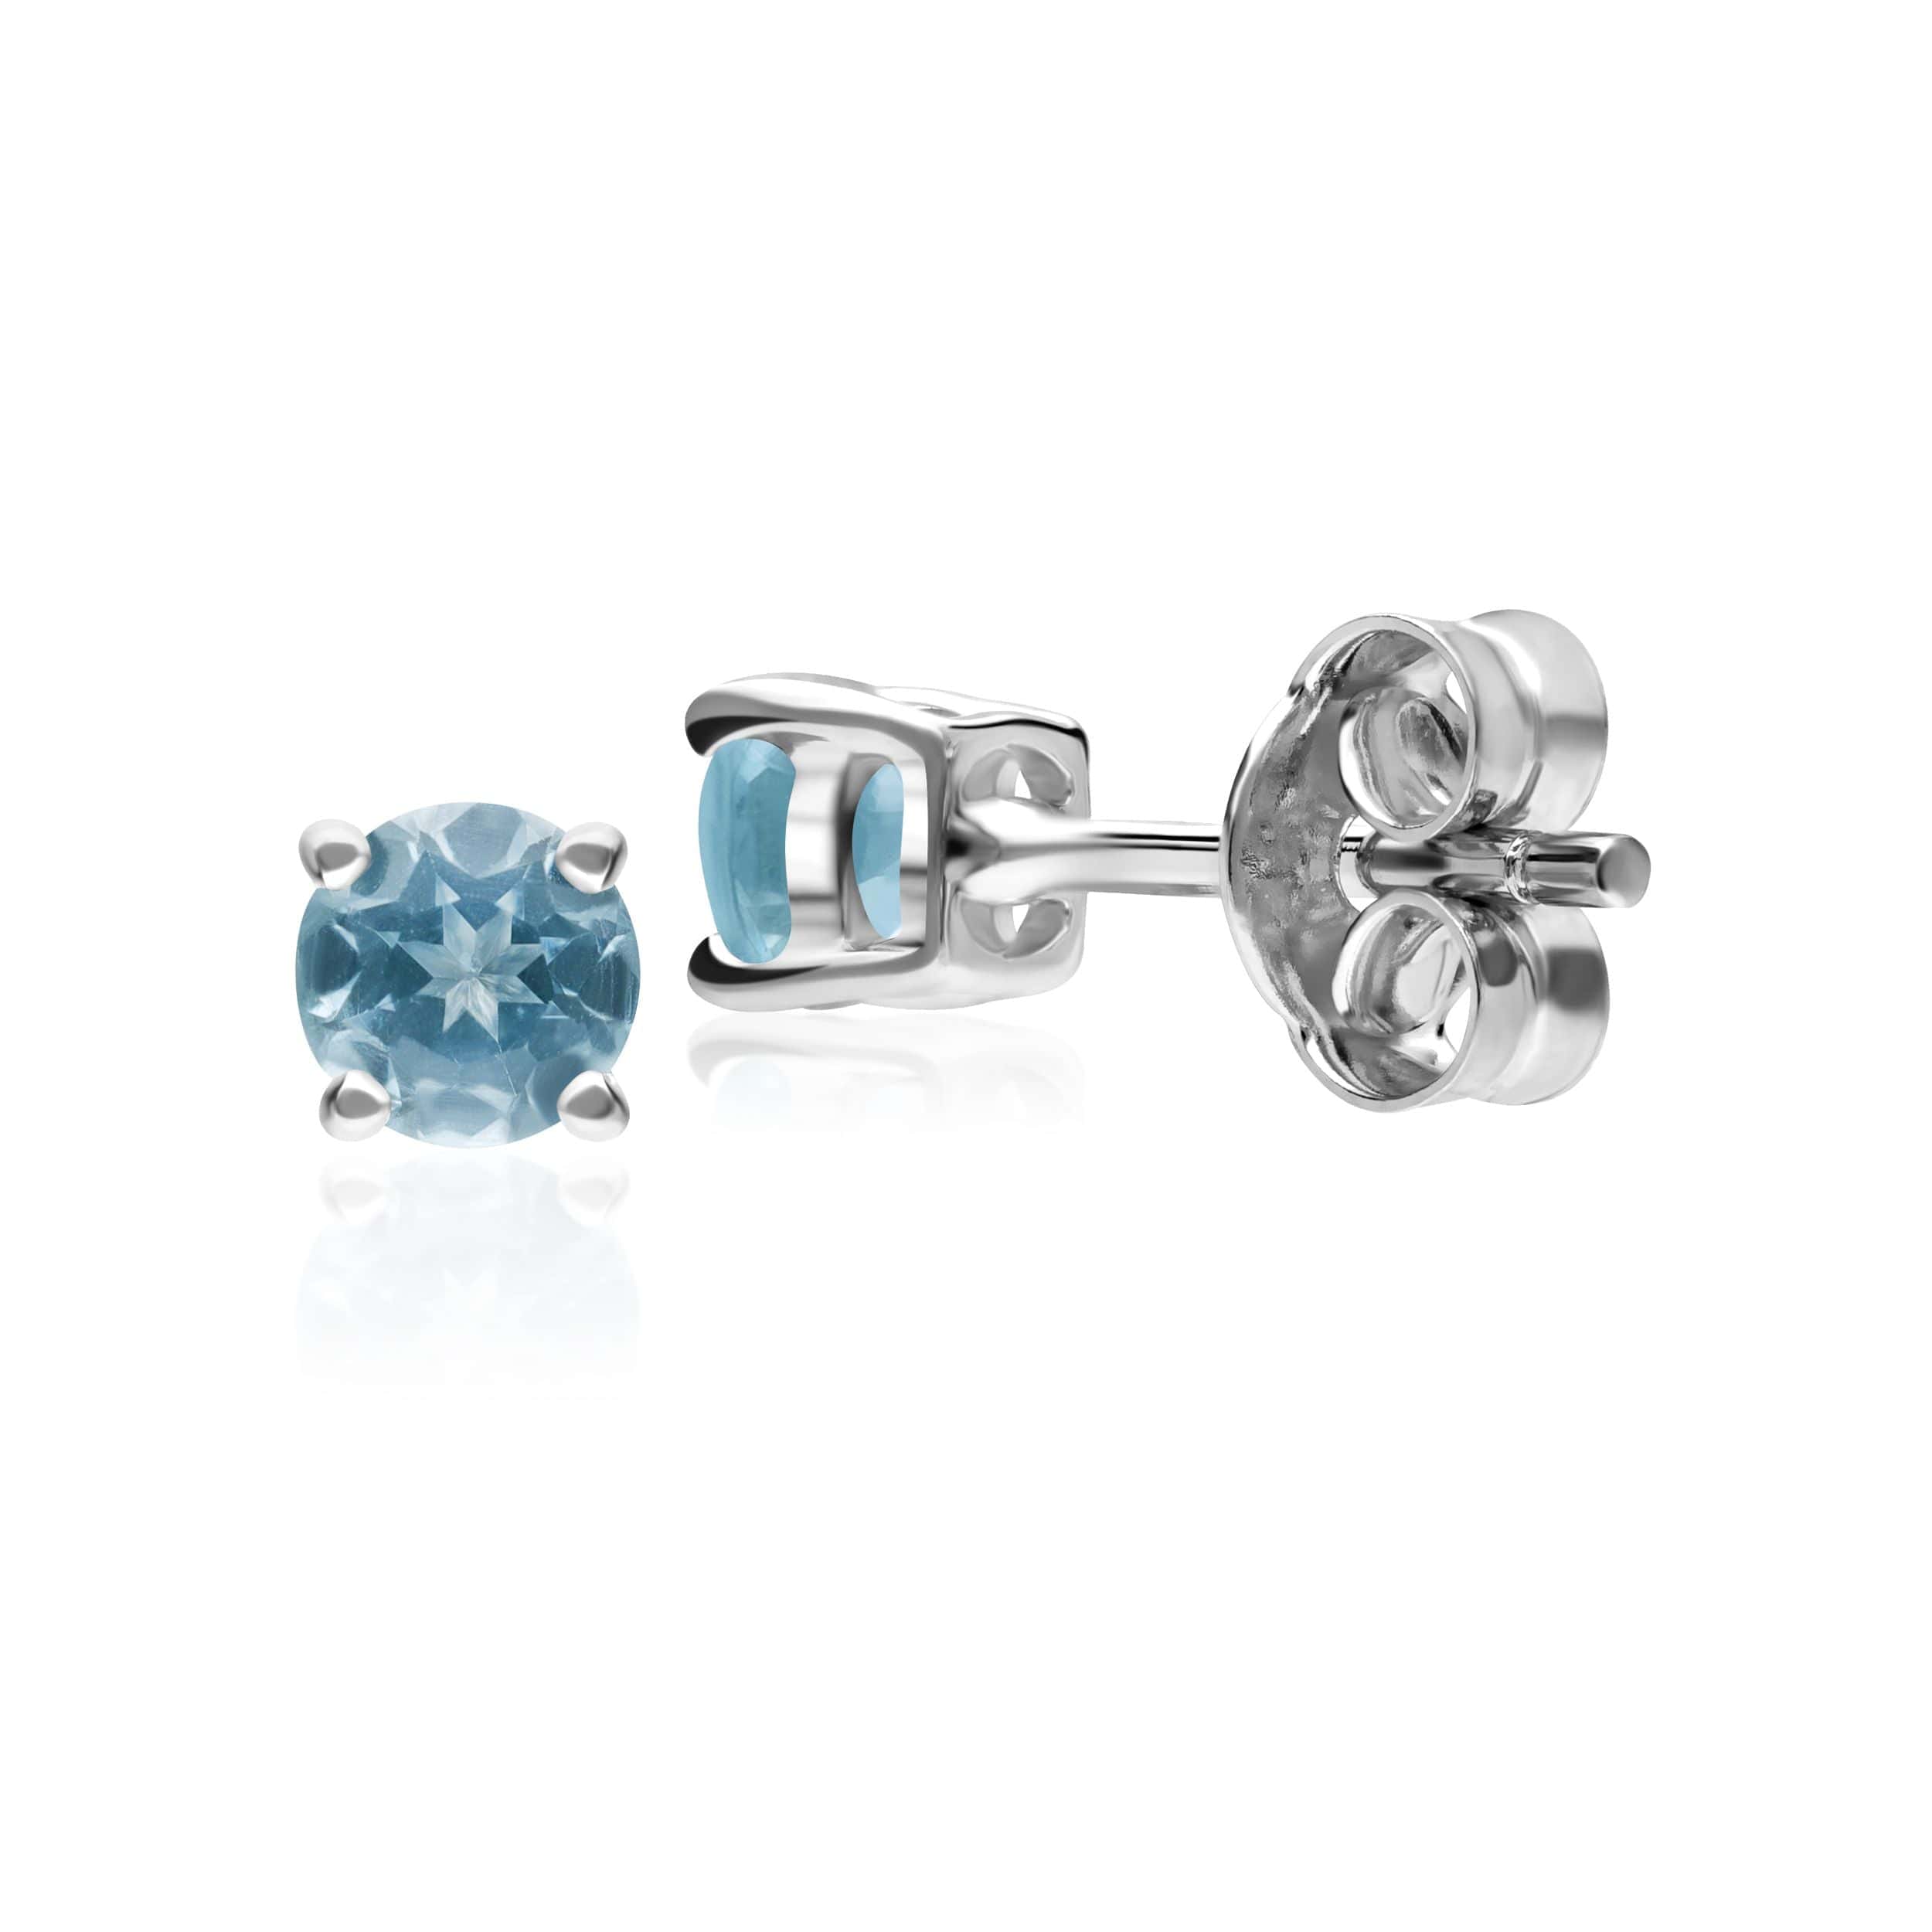 Classic Round Blue Topaz Stud Earrings in 9ct White Gold - Gemondo